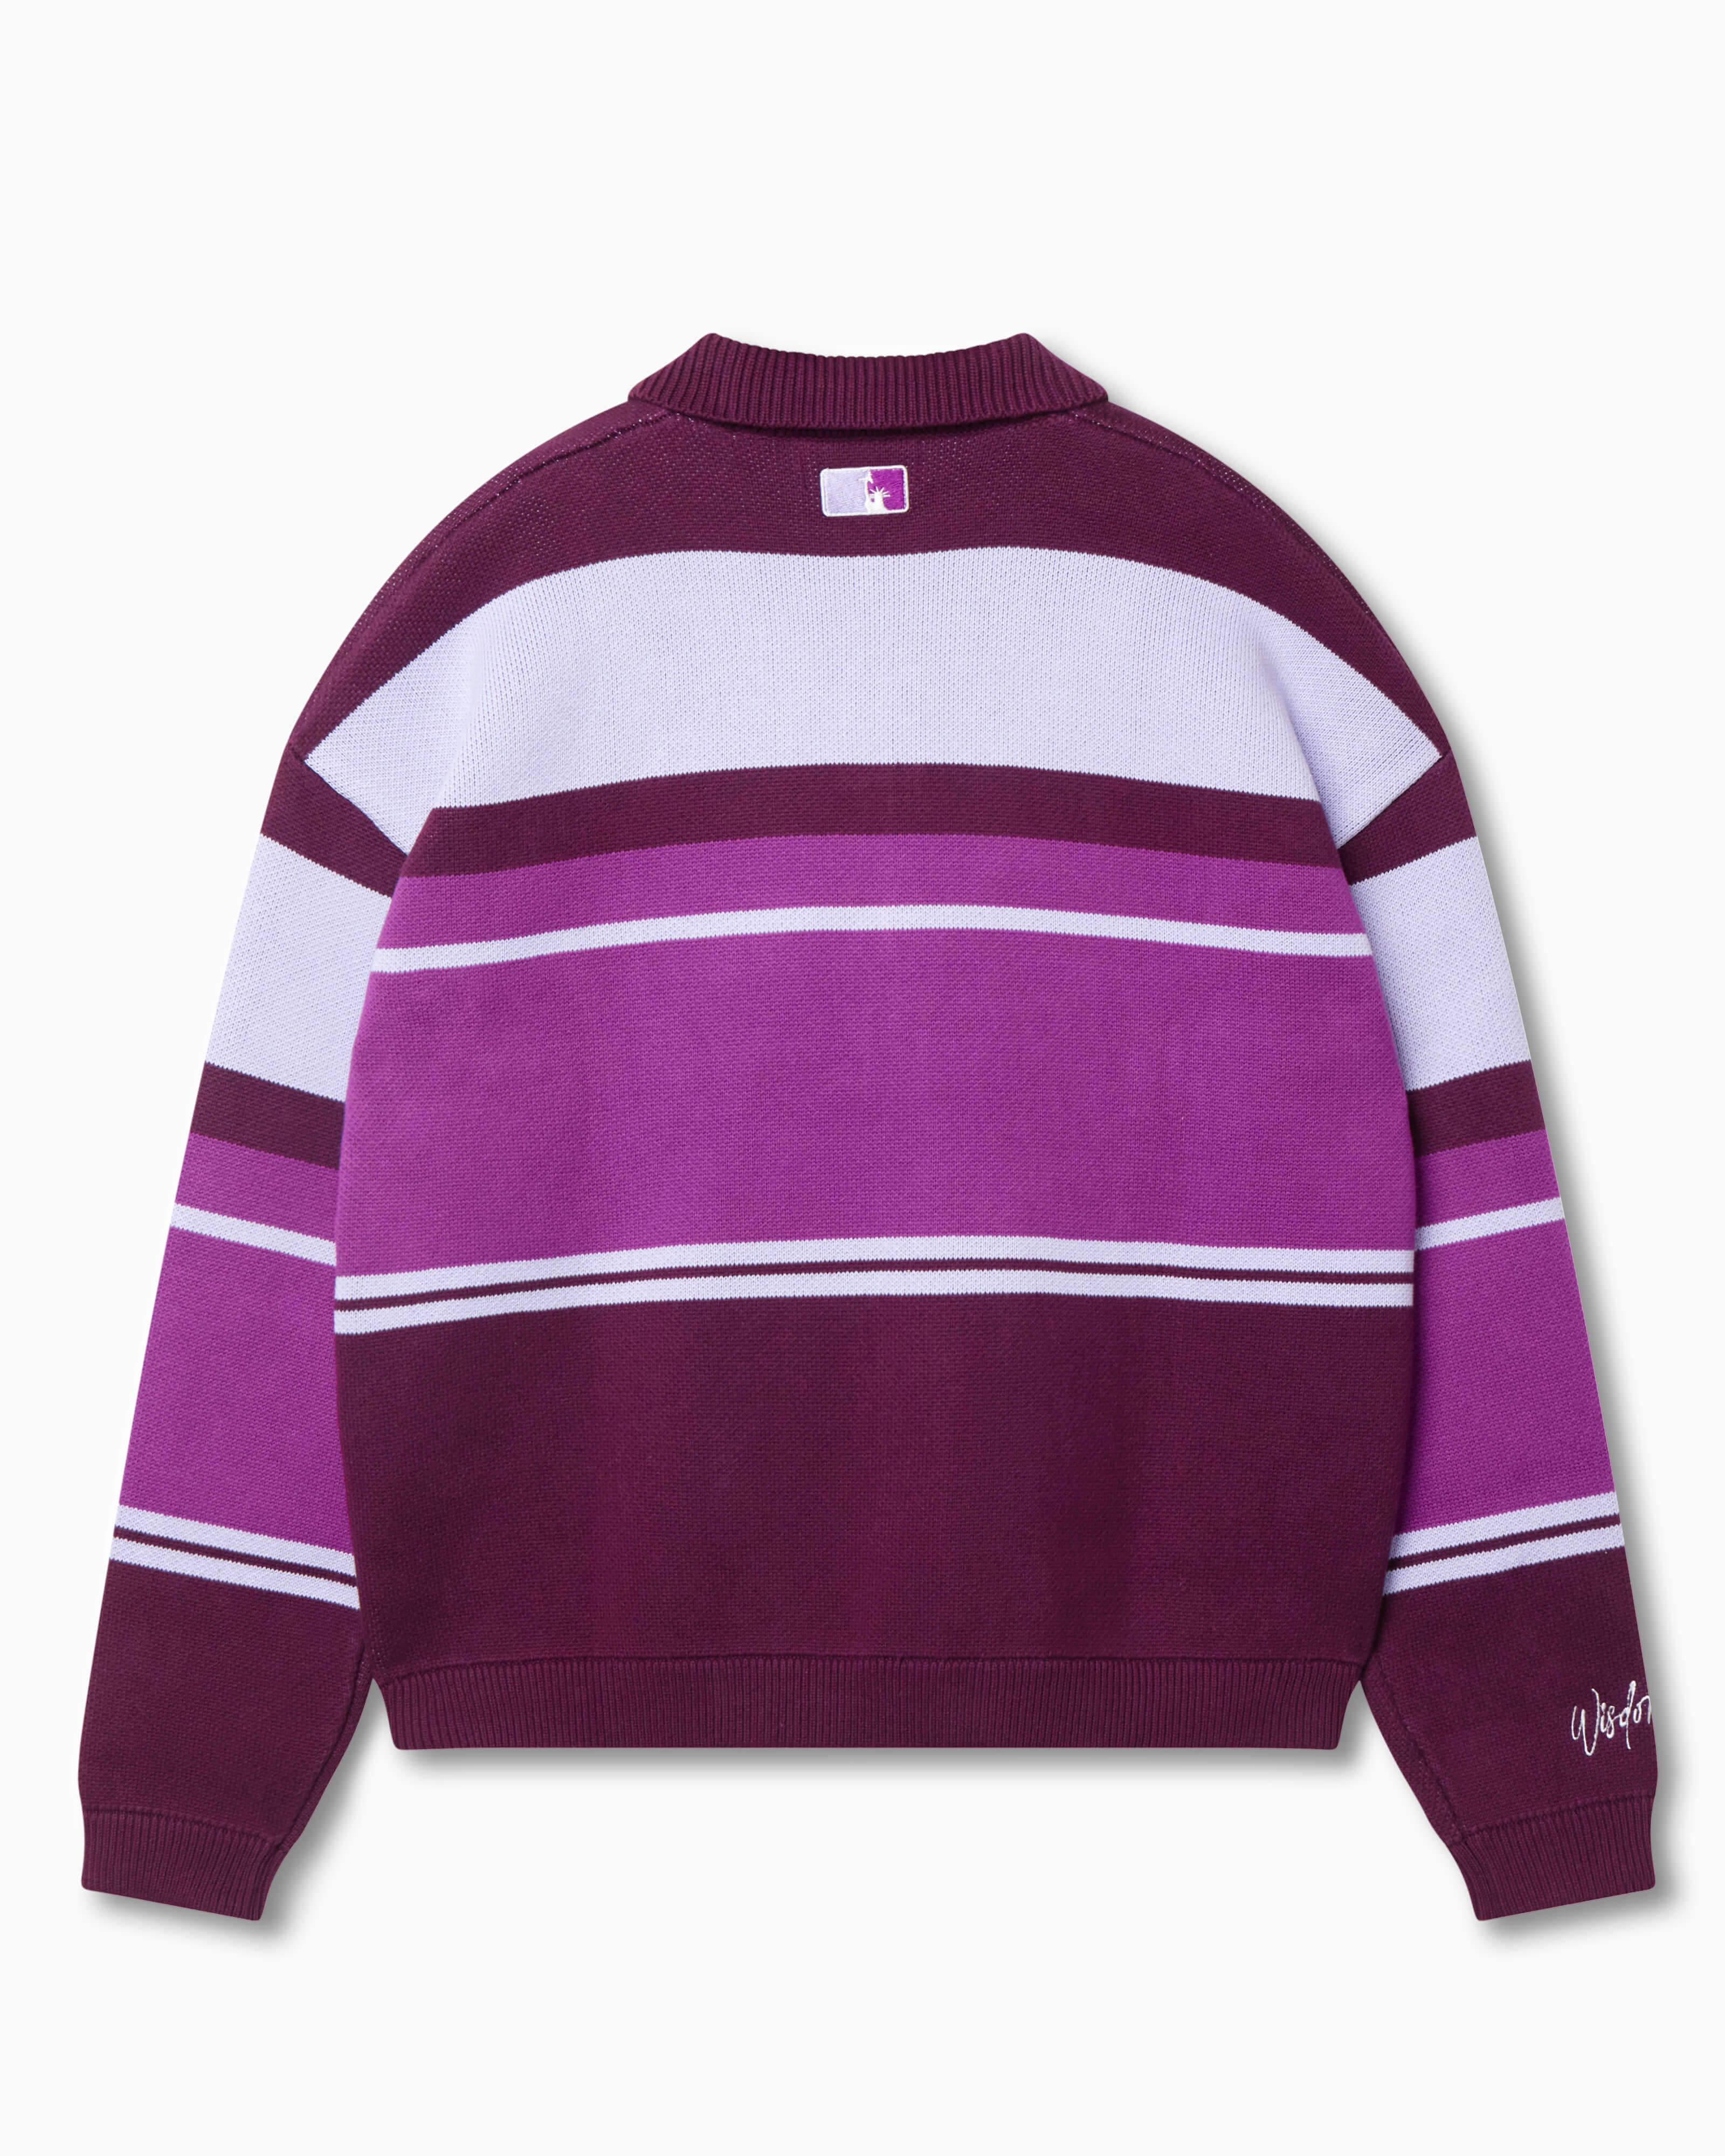 Back of Wisdom of Age Purple Striped Rugby Sweater